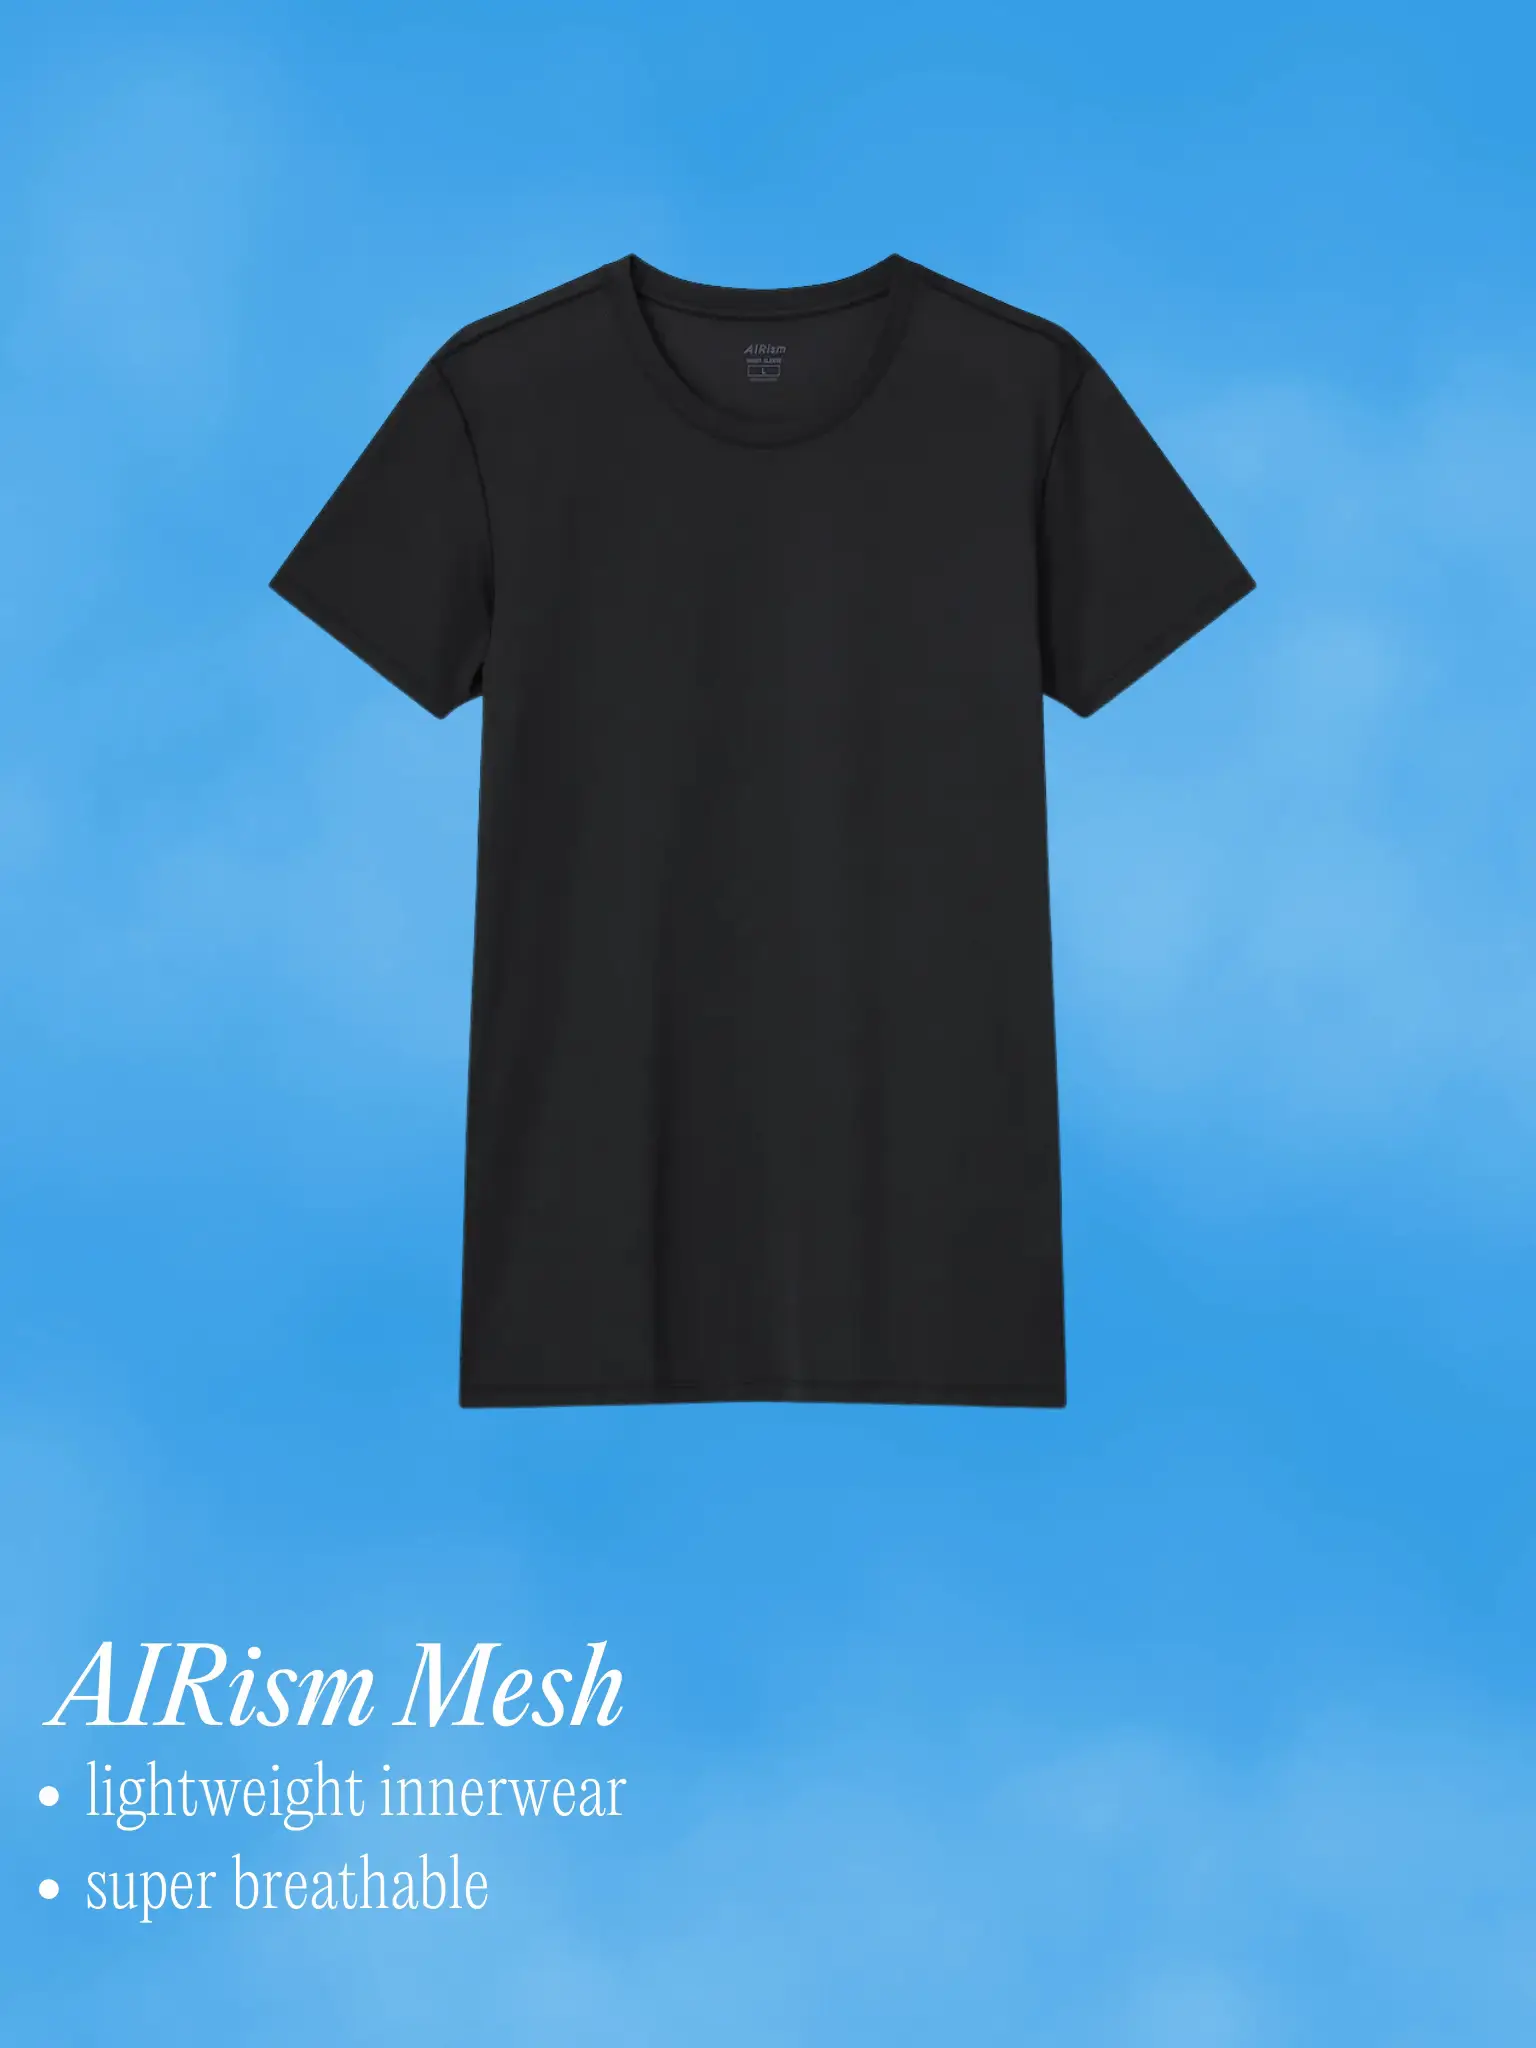 Highlights] Mini lunch bag and a free AIRism Anti Odour Mesh Short Sleeve  T-Shirt for men and an AIRism Bra Camisole for women - Inside Recent